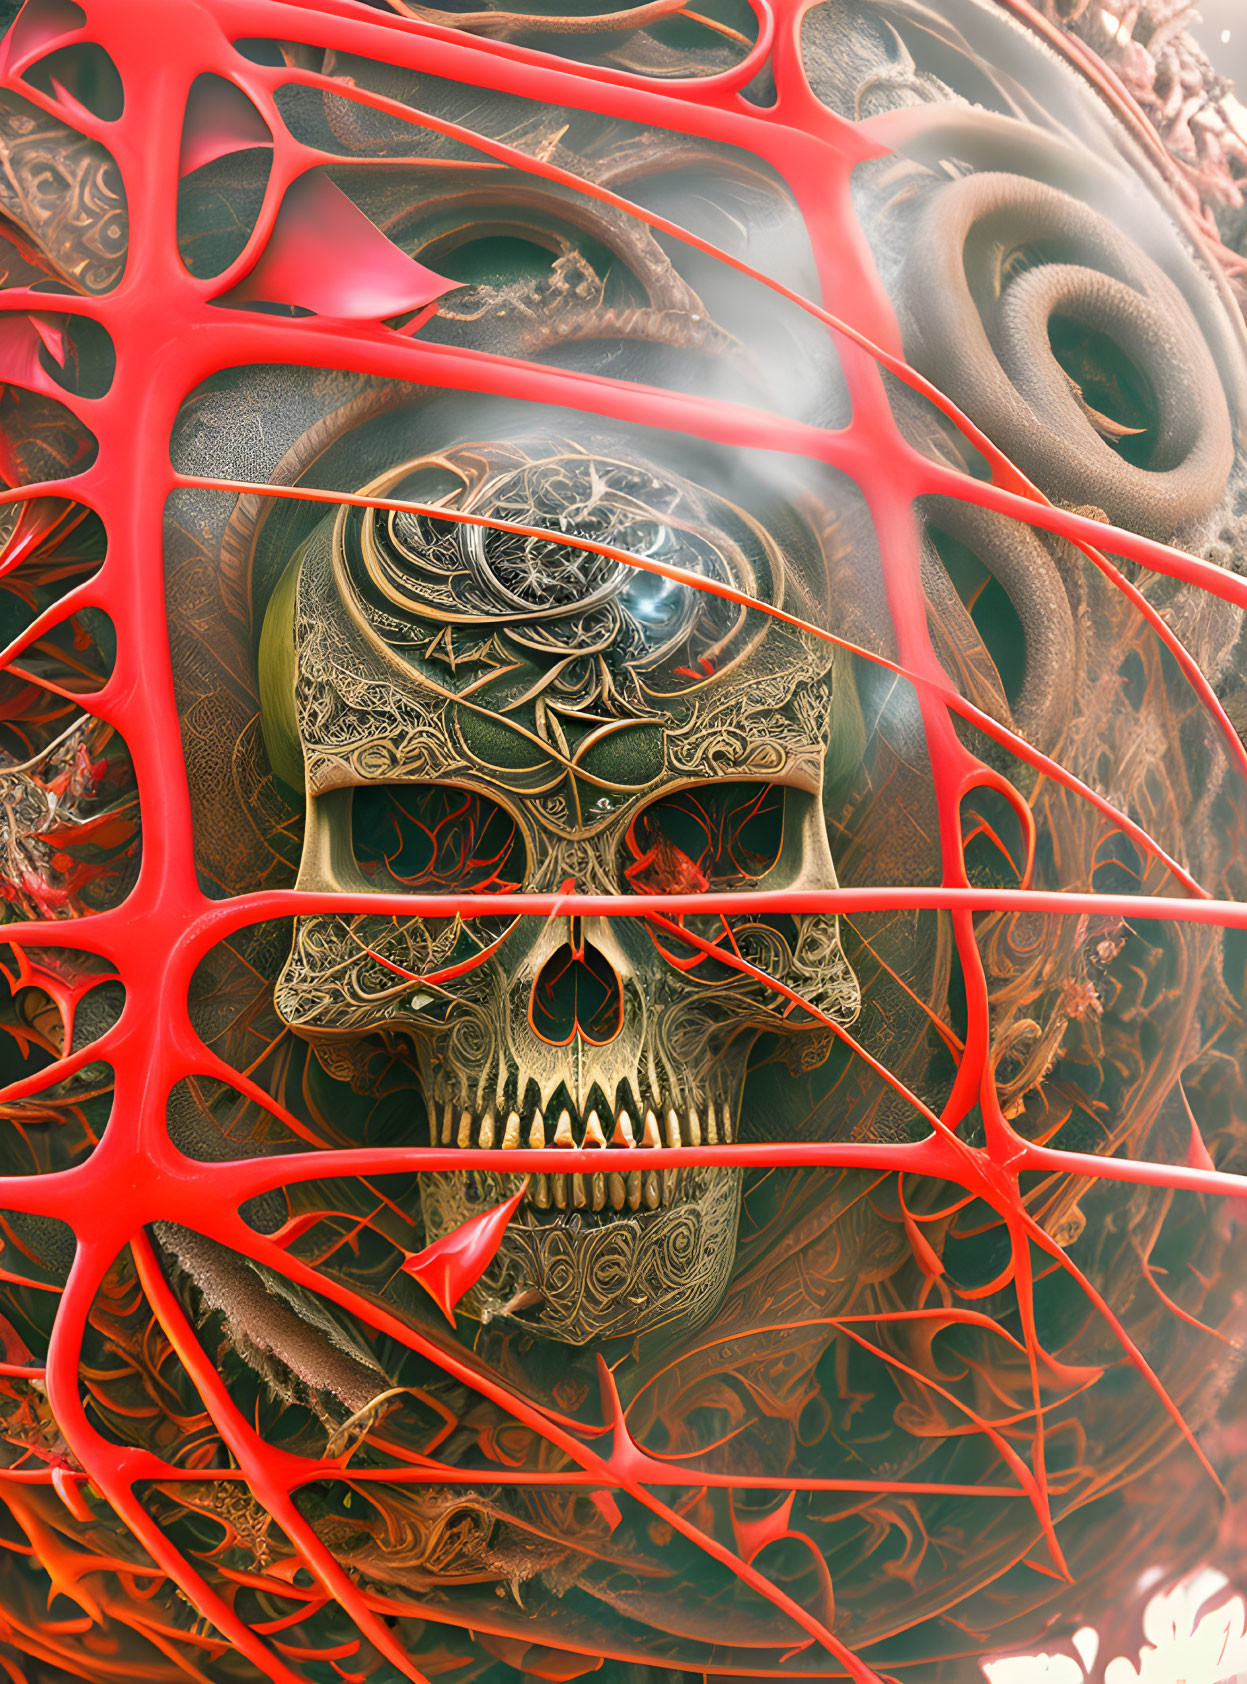 Surreal digital art: ornate skull in red web with swirling organic backdrop